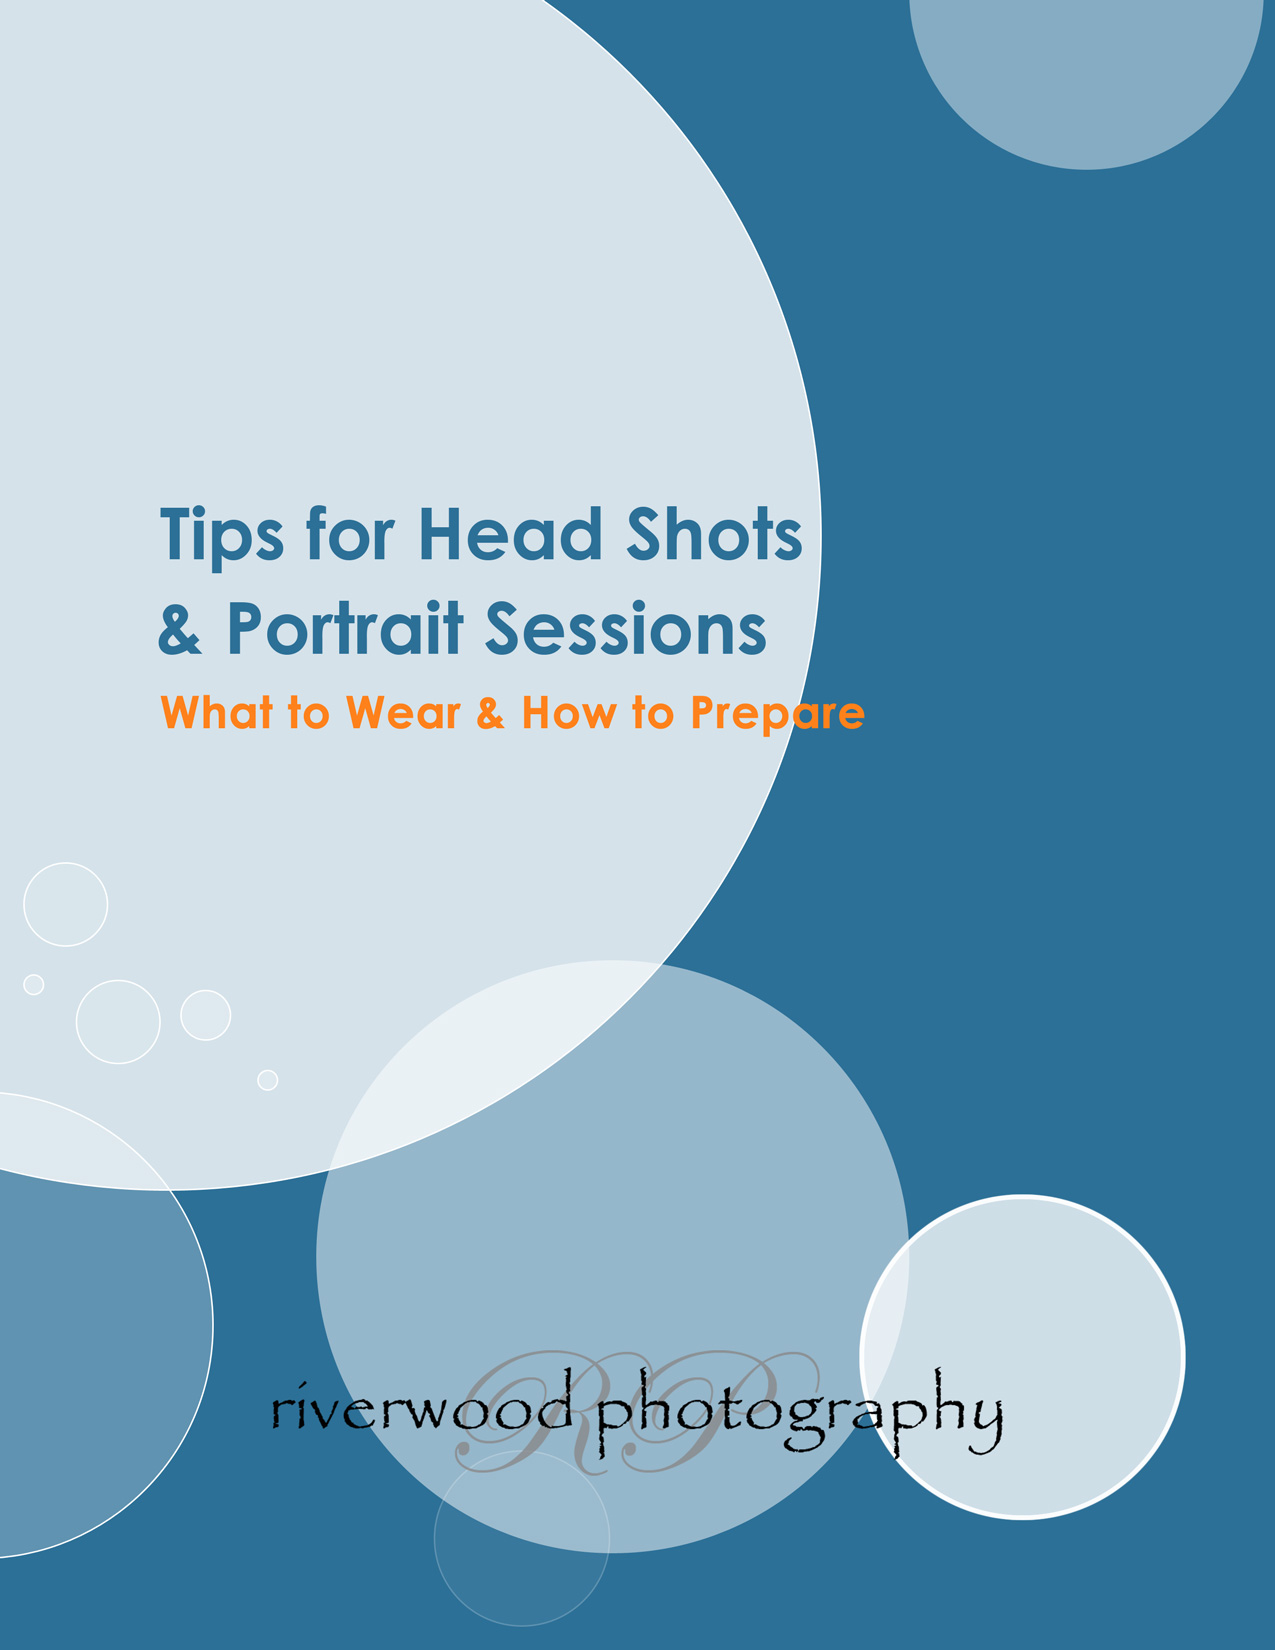 Tips for Headshots and Portrait Sessions